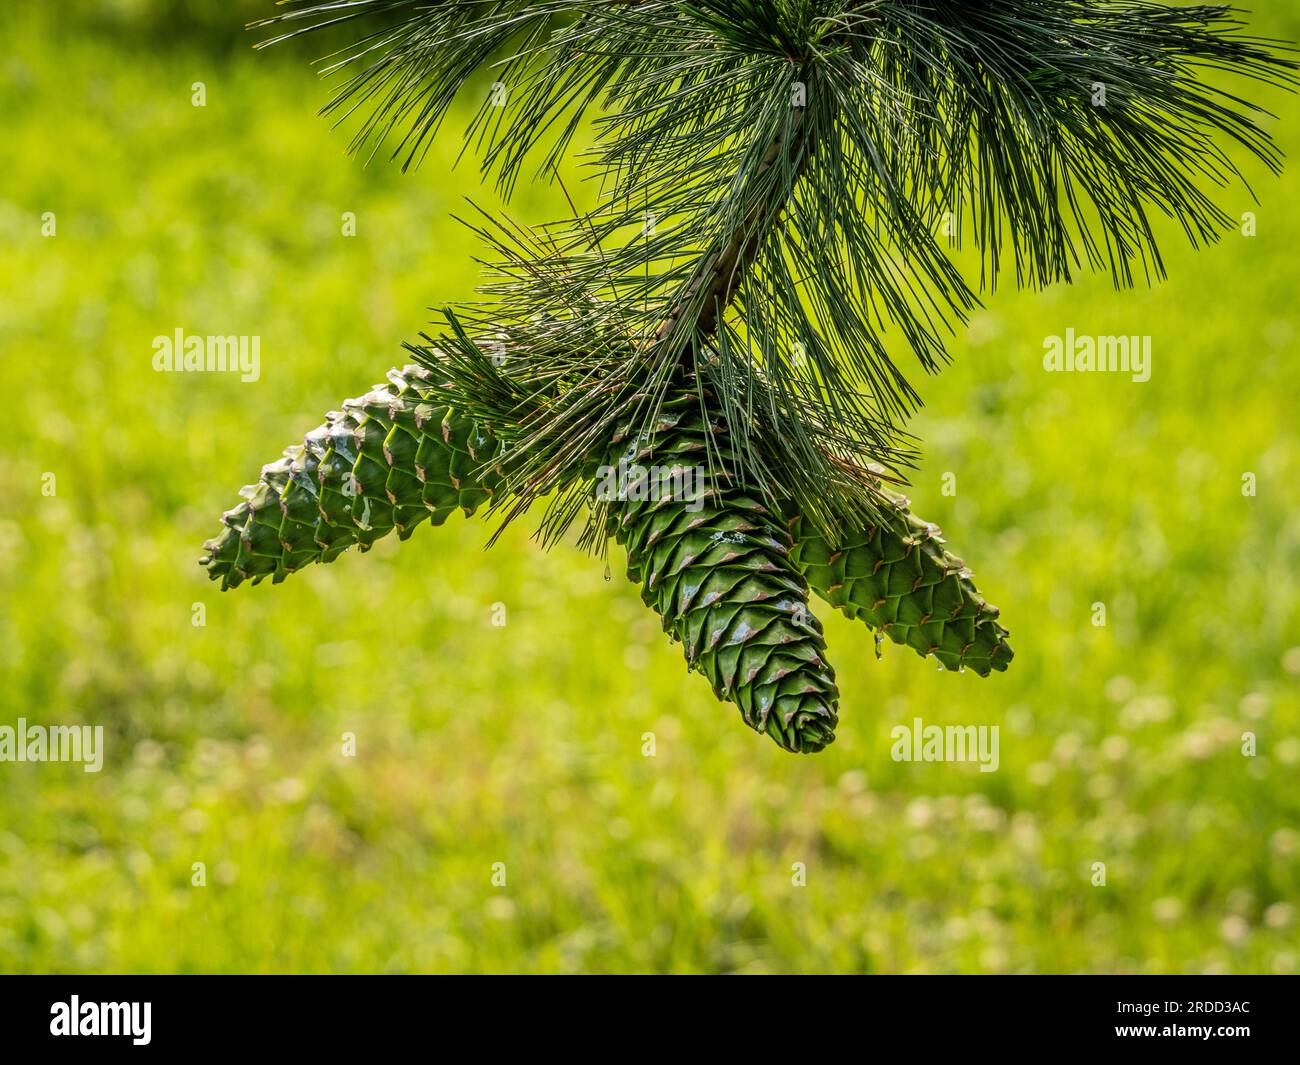 Large green pine cones hanging from the tip of a branch on a pine tree, Stock Photo